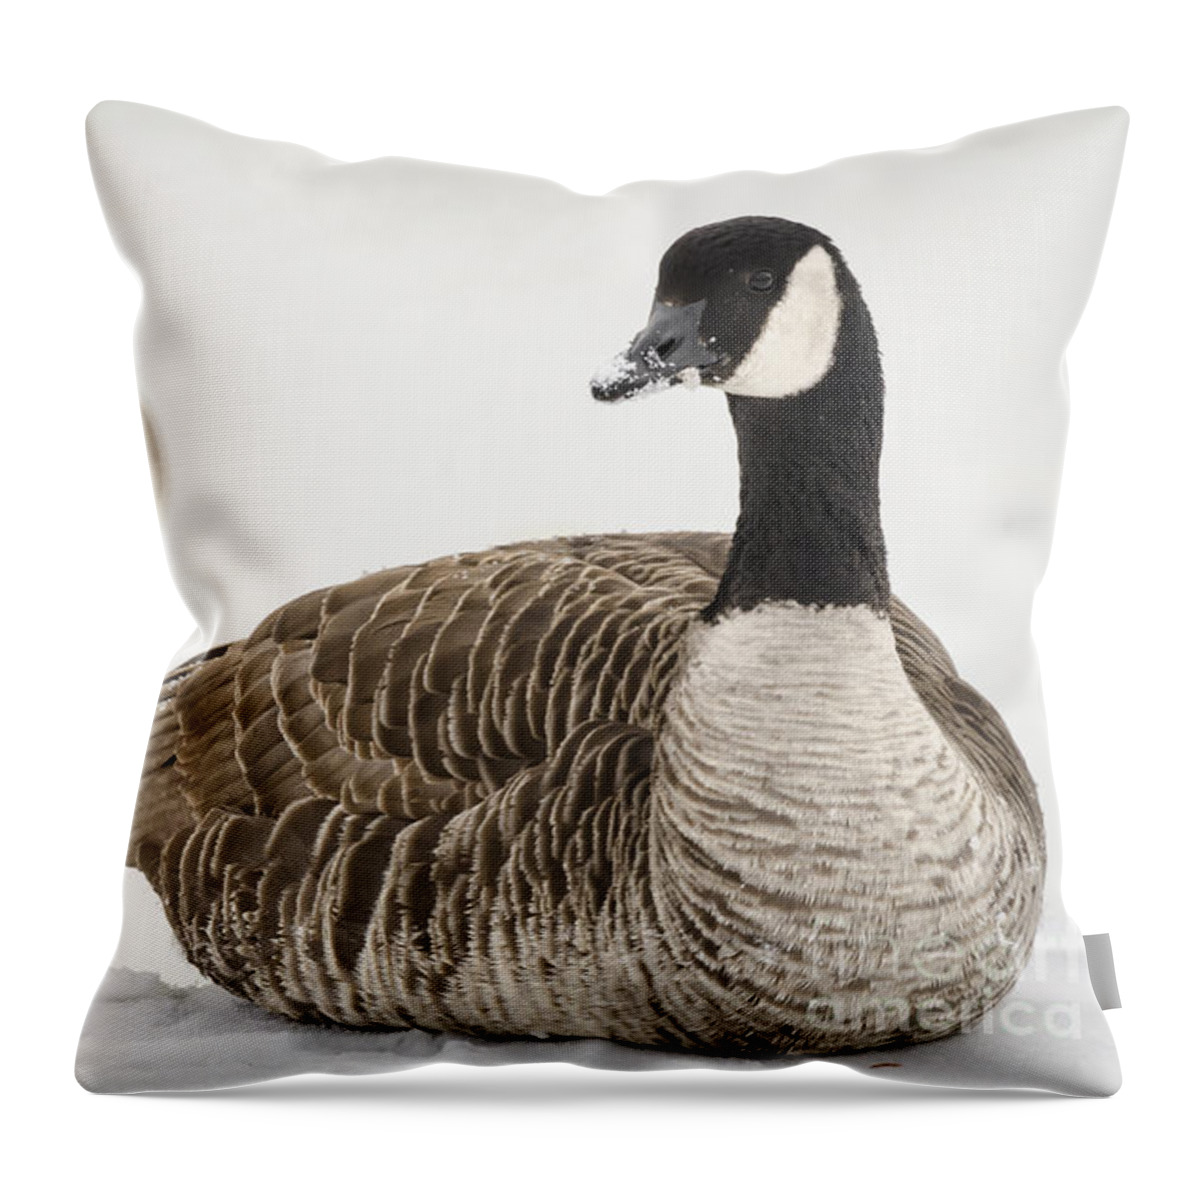 Animal Throw Pillow featuring the photograph Canadian Geese by Andrea Silies